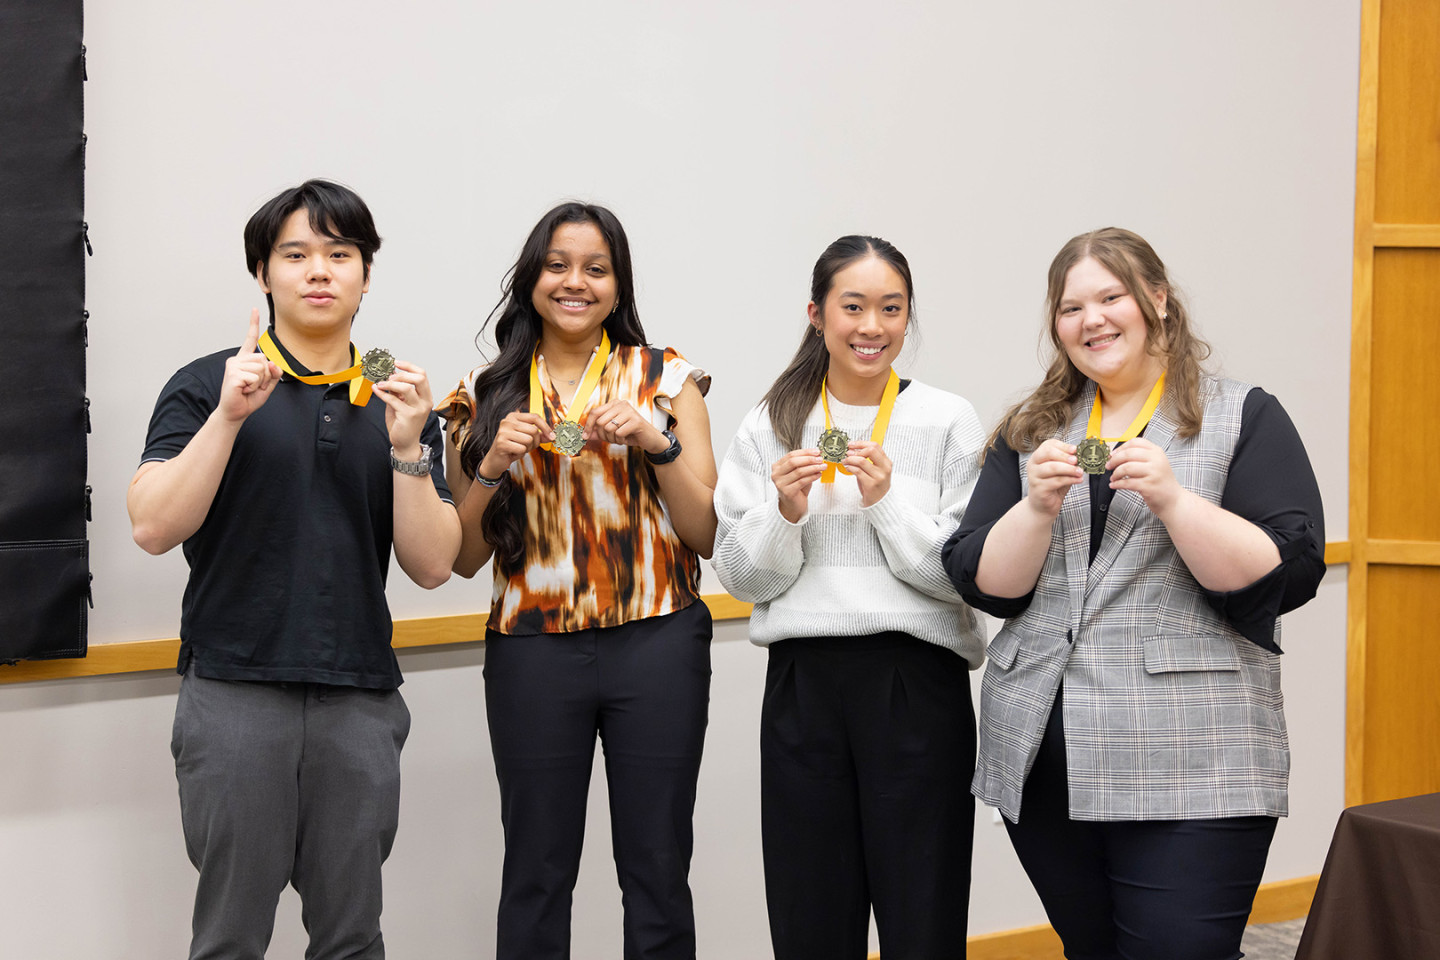 Brush Ease, the winning team at this year's Bronco Pitch Competition. Left to right, team members are Teh Ang Qi, Bhairavi Patel, Sophie Nguyen and Paige DePatis.